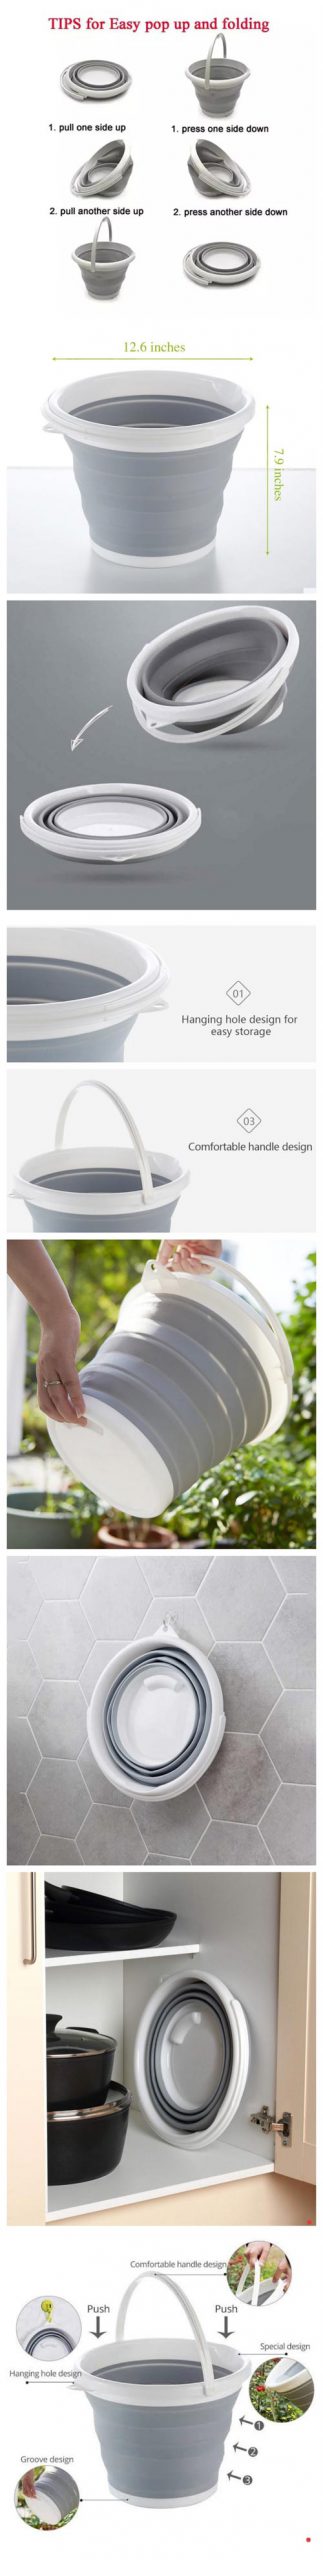  Best Silicone Foldable Bucket In Pakistan